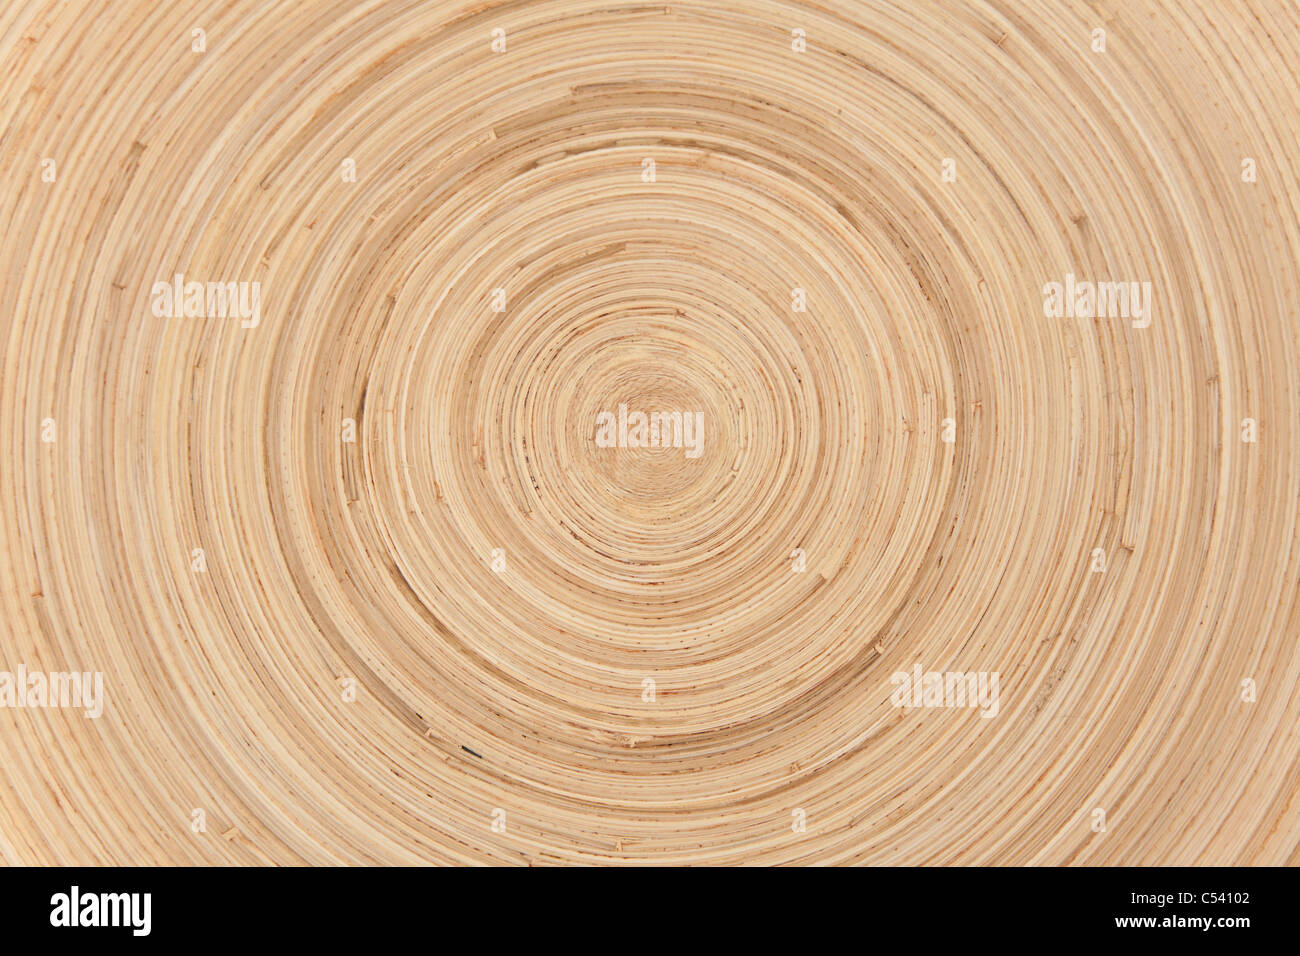 https://c8.alamy.com/comp/C54102/a-natural-abstract-circular-background-pattern-of-bamboo-C54102.jpg